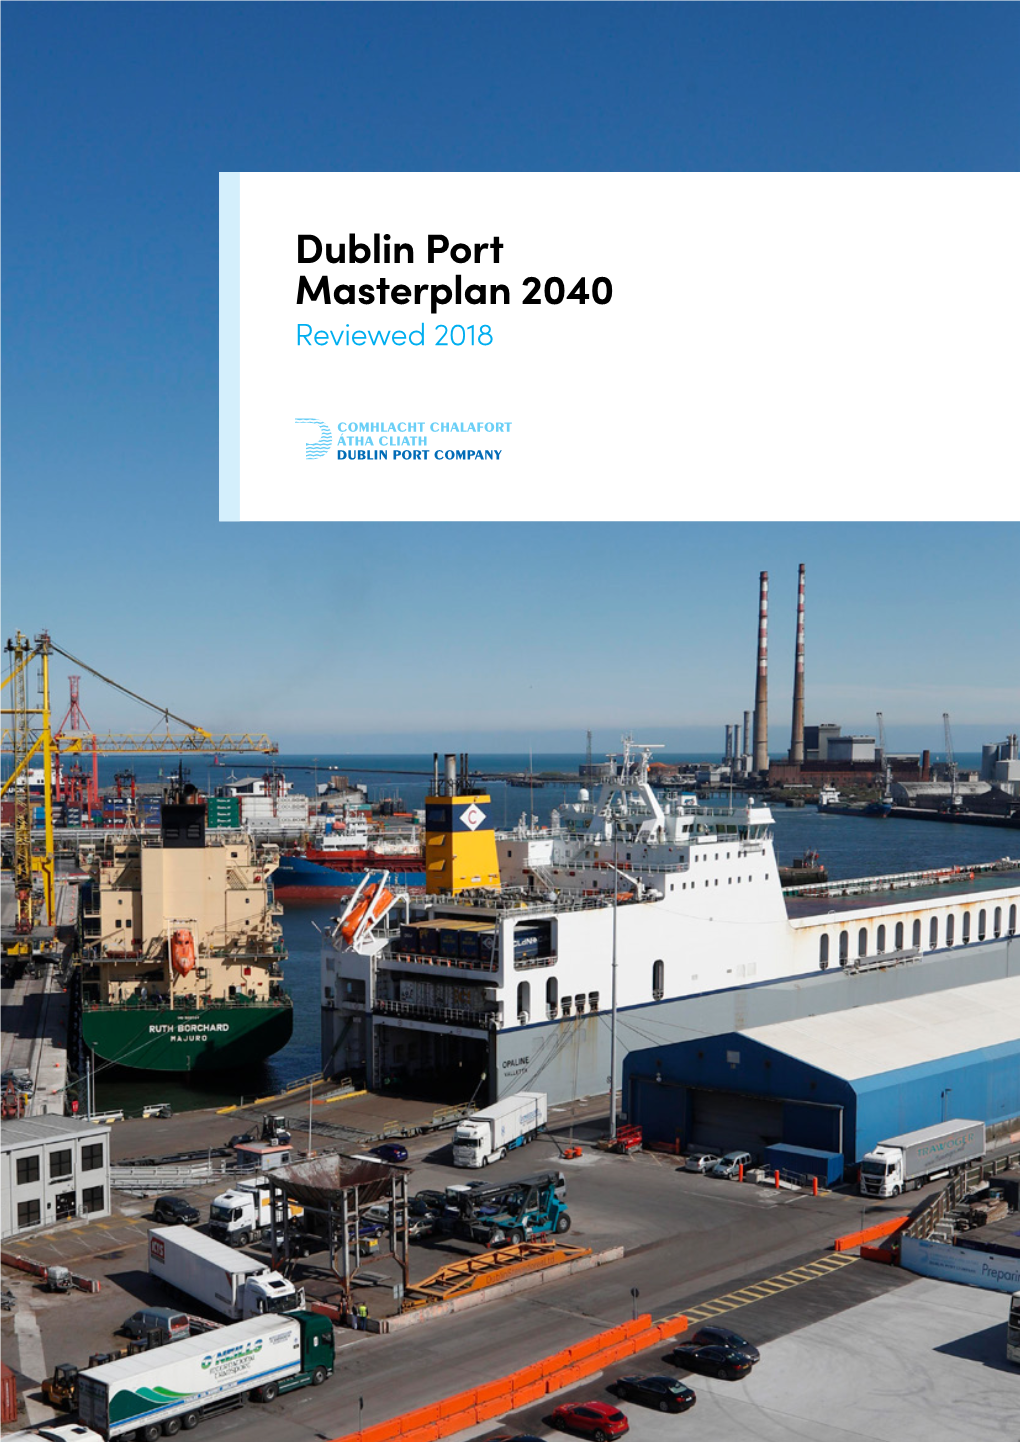 Dublin Port Masterplan 2040 Reviewed 2018 Contents